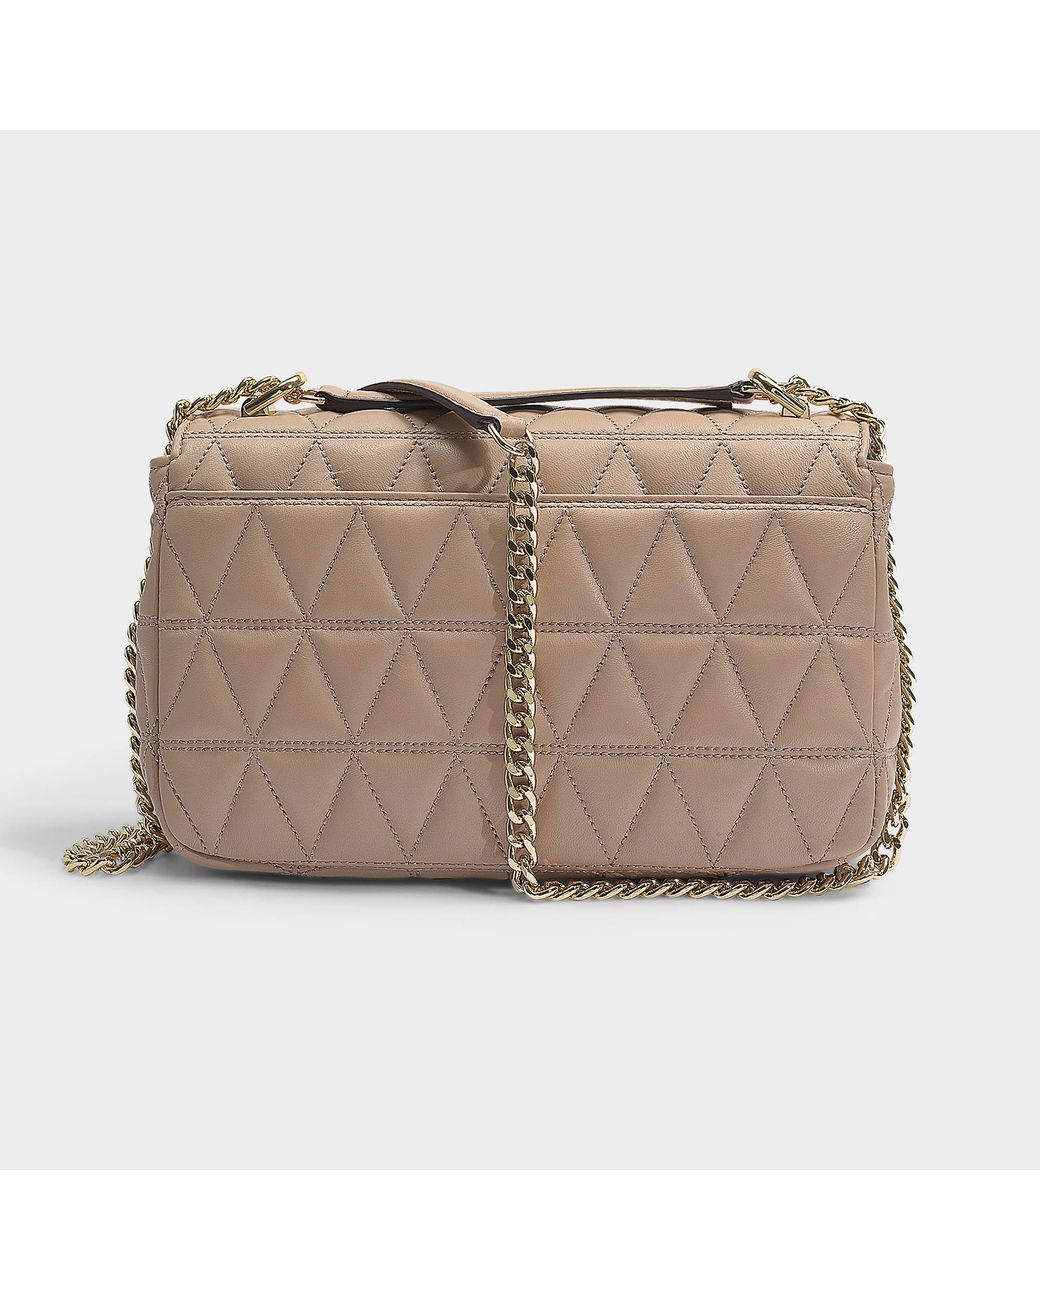 MICHAEL Michael Kors Sloan Large Chain Shoulder Bag In Truffle Quilted  Lambskin in Natural | Lyst